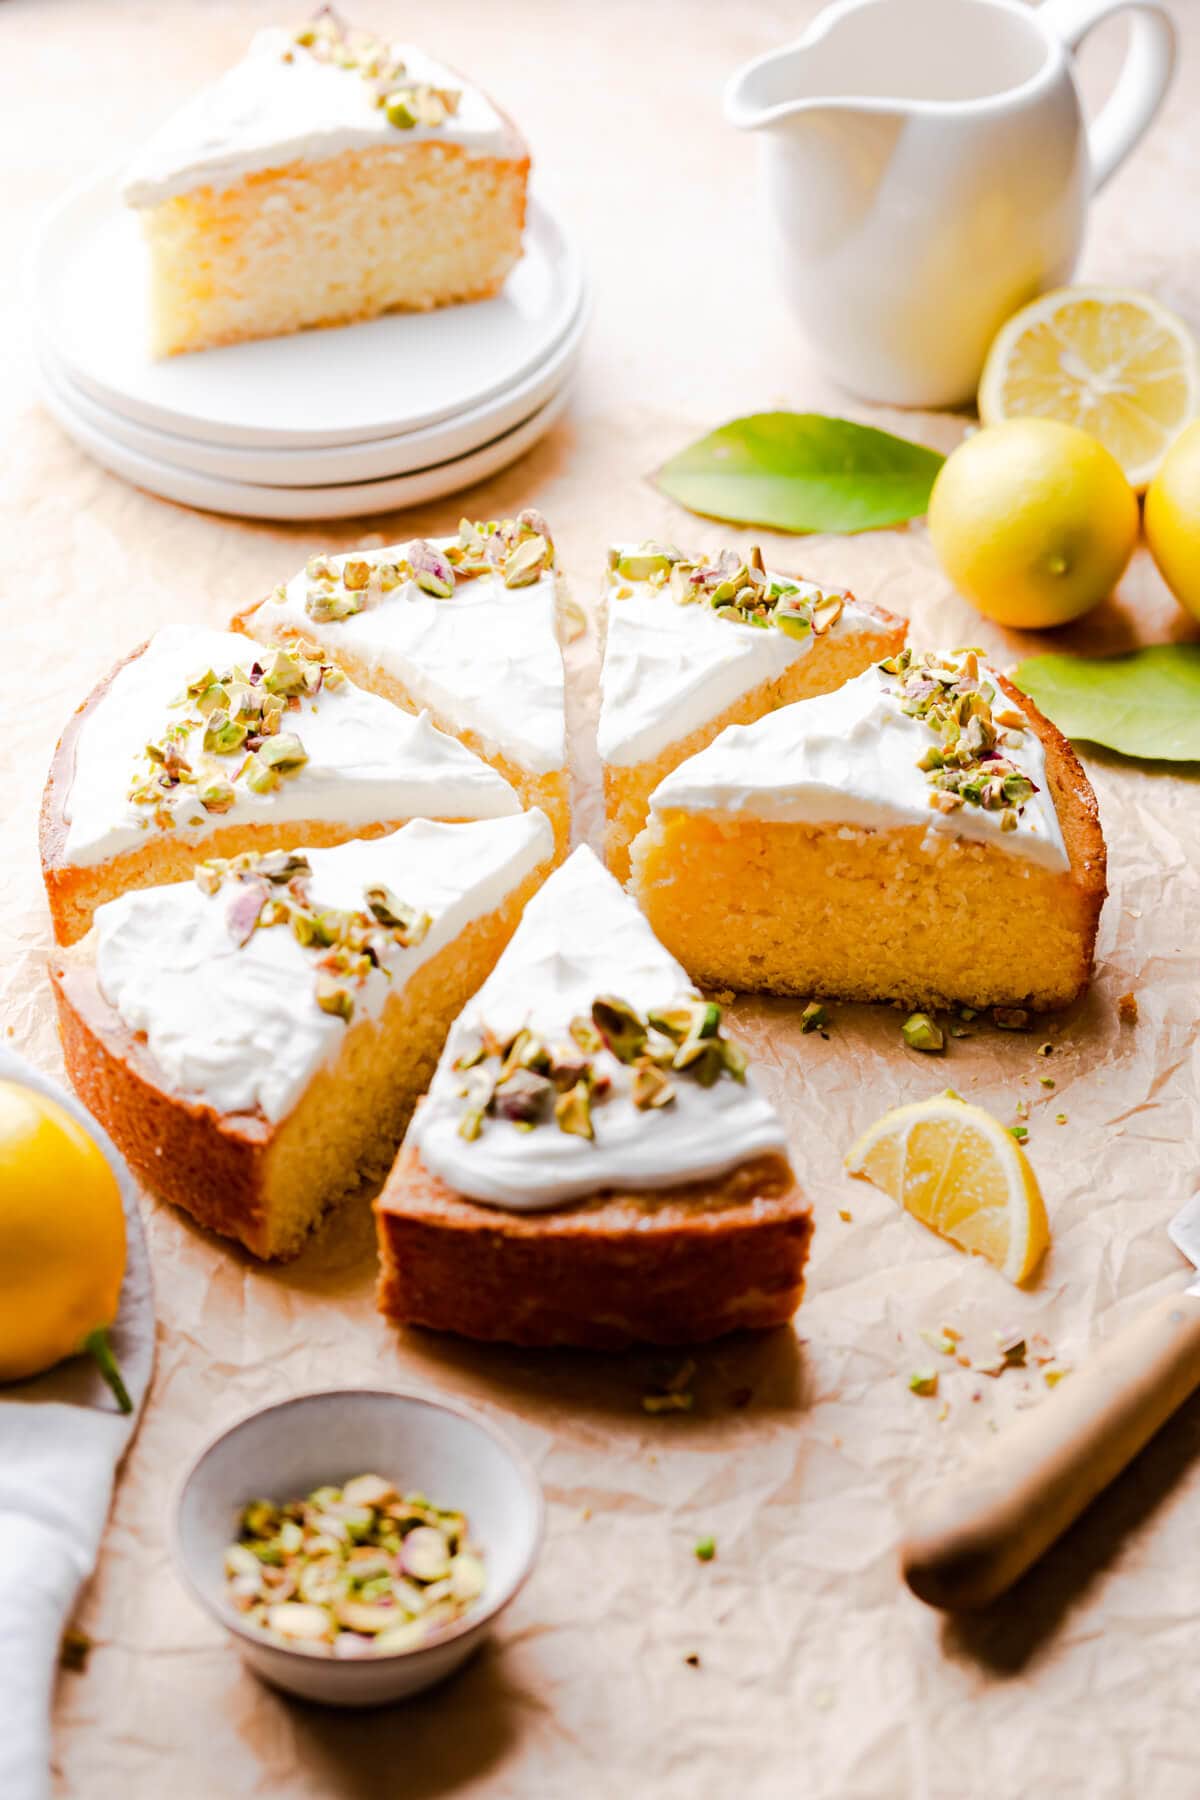 45 degree angle view of cake cut into slices and topped with yoghurt and pistachio nuts